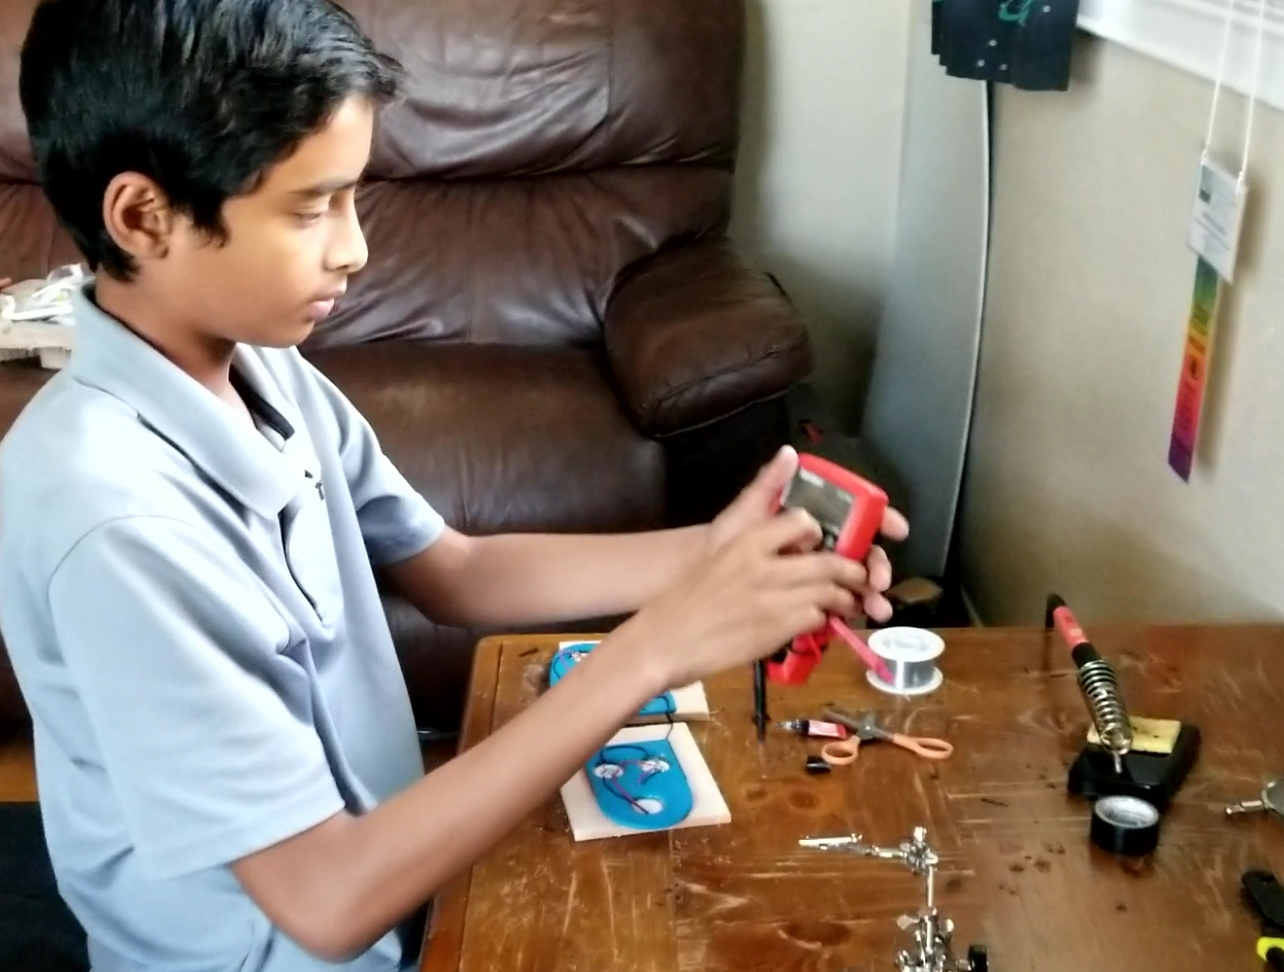 Child working on an invention